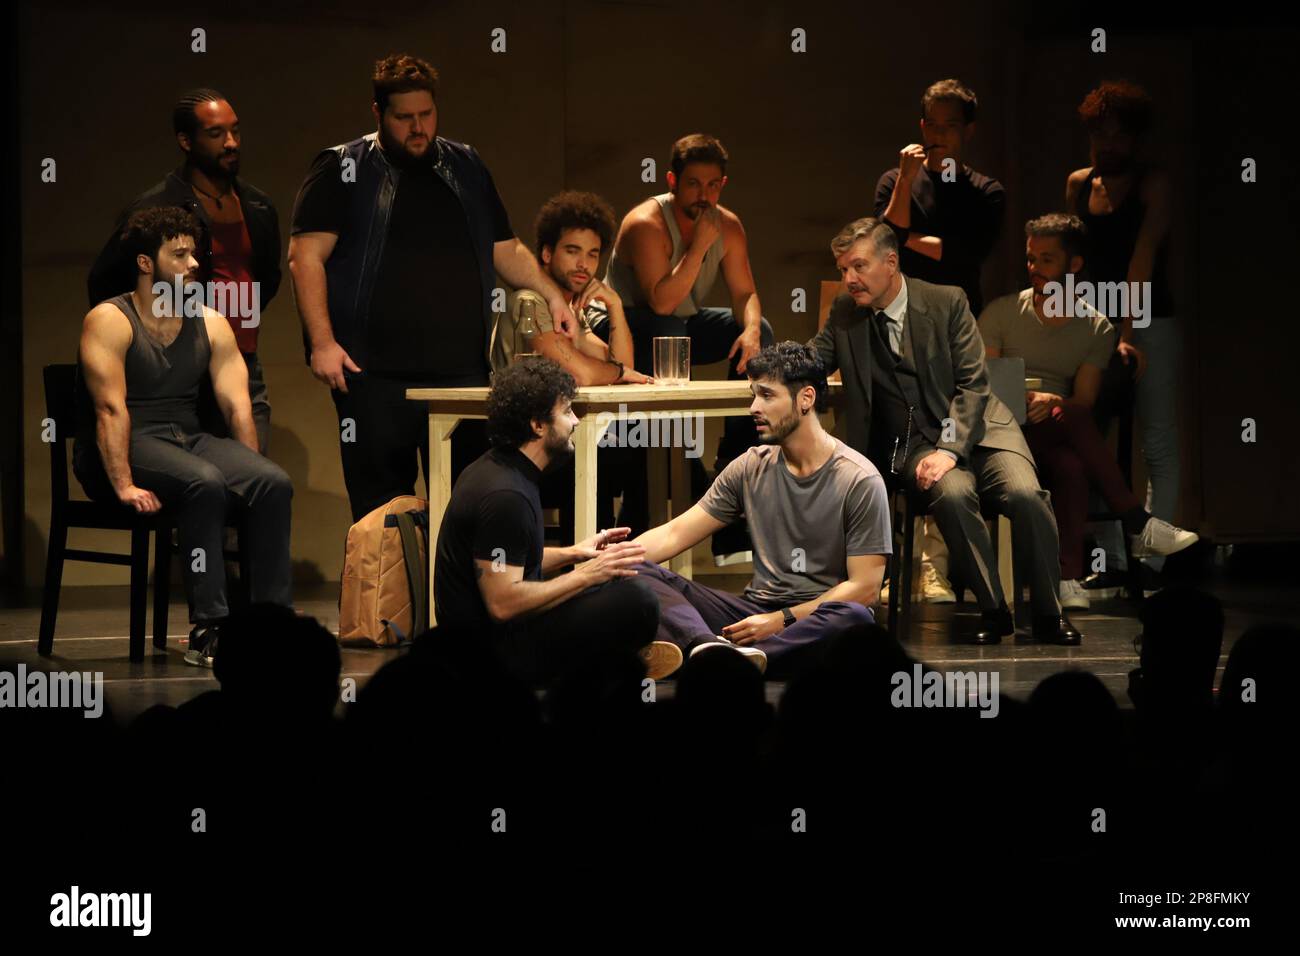 March 9, 2023, Sao Paulo, Sao Paulo, Brasil: (INT) Open Rehearsal of the play Ã¢â‚¬Å“The Inheritance.Ã¢â‚¬Â March 08, Sao Paulo, Brazil: Open rehearsal of the play 'A Heranca', meaning Ã¢â‚¬Å“The InheritanceÃ¢â‚¬Â at Teatro Vivo, in Sao Paulo, on Wednesday (08) on display on Thursday(9). Actor Bruno Fagundes and director Ze Henrique de Paula are the creators and producers of the project, which also feature Reynaldo Gianecchini, Marco Antonio Pamio, Rafael Primot and Andre Torquato in the lead roles, in addition to a special appearance by Miriam Mehler. The montage puts on the agenda a discus Stock Photo